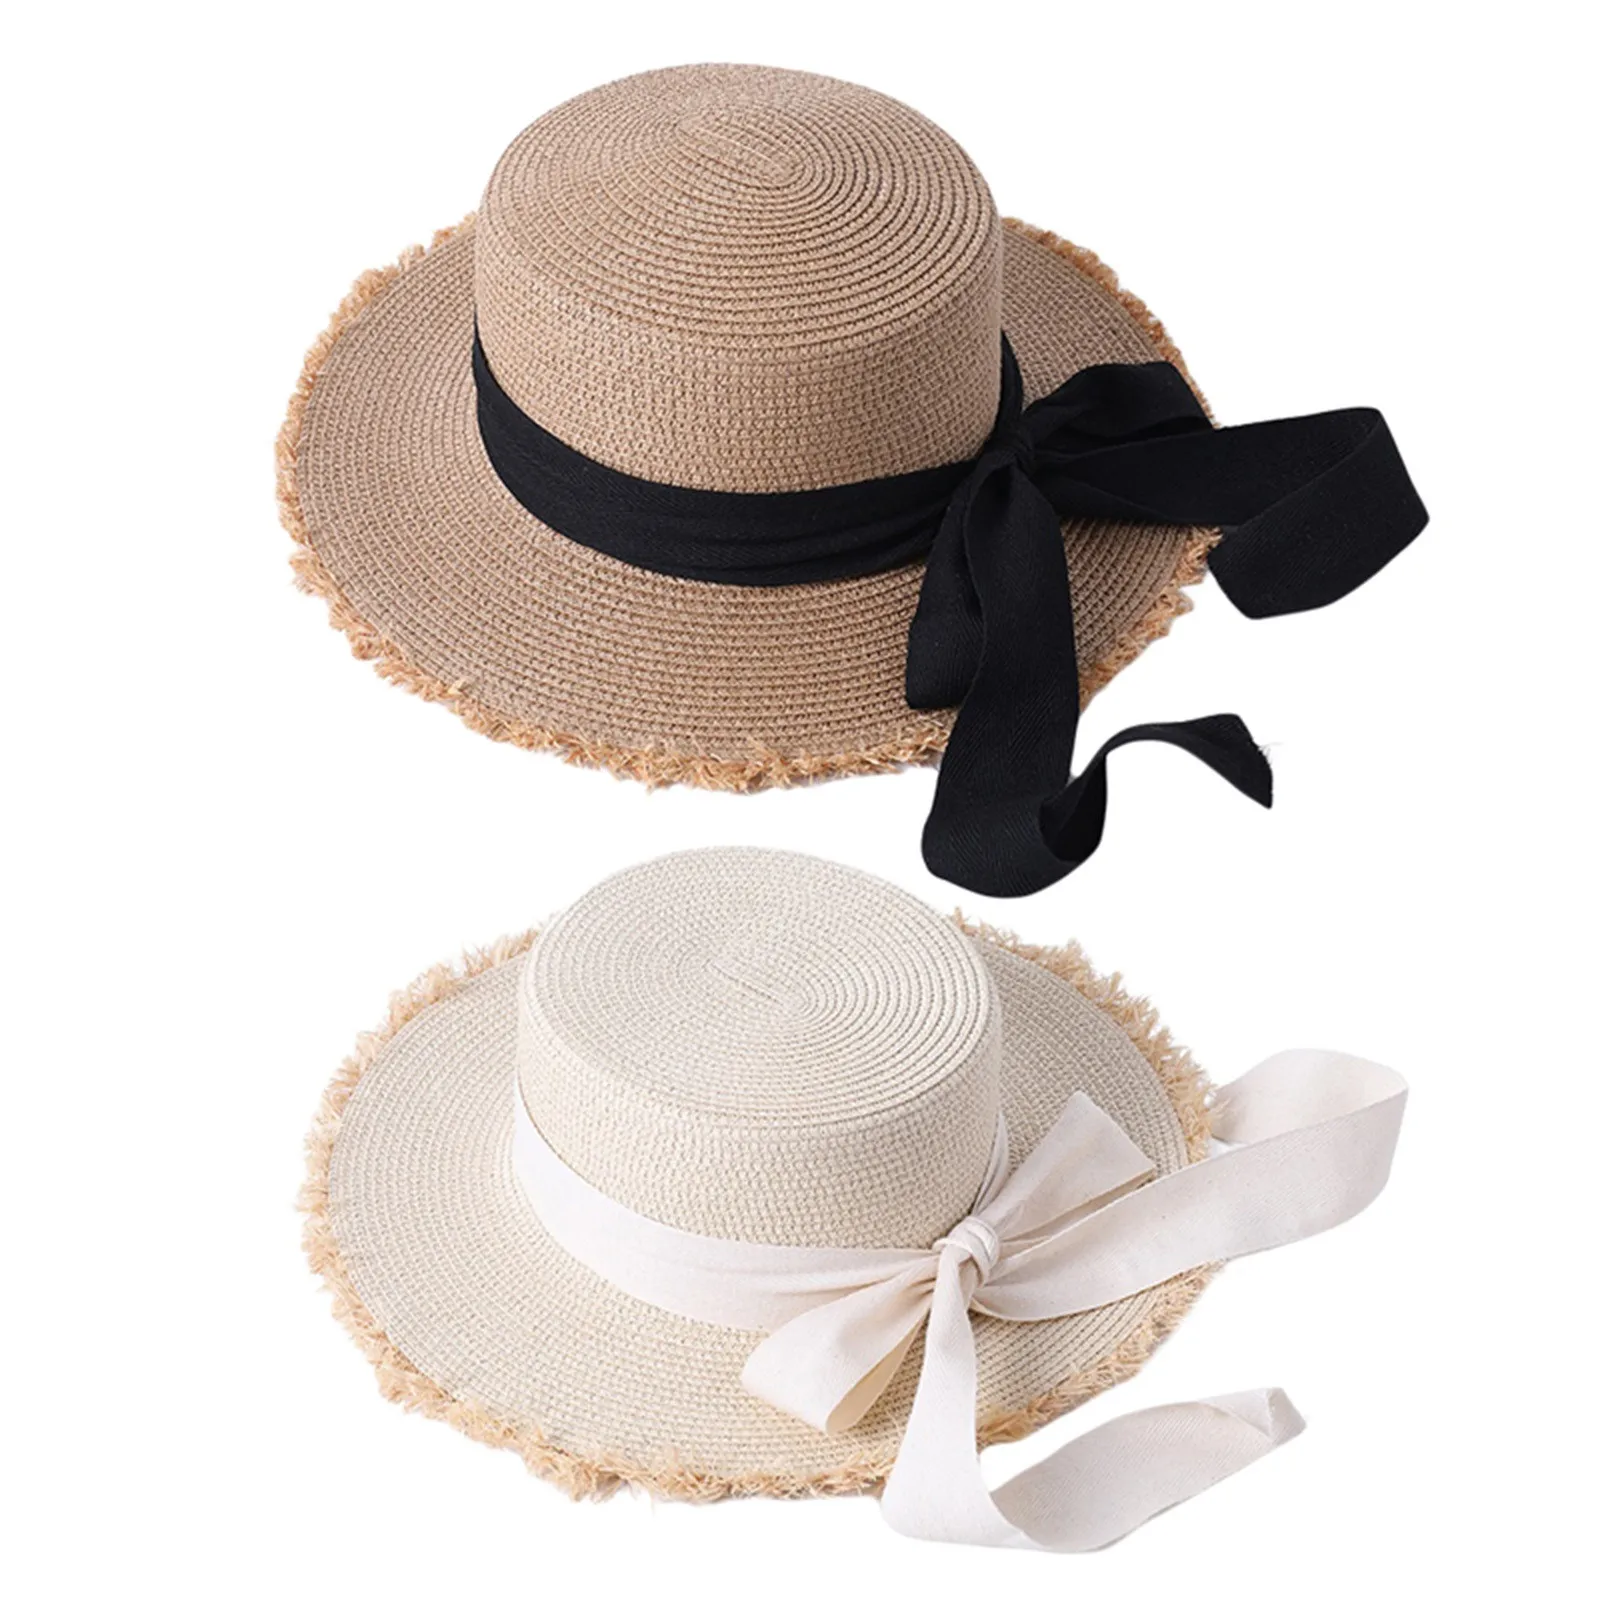 

Women Visor Straw Hat with Bow Ribbon Raw Edge Decoration Sweet Beach Style Sun Hats for Female Ladies Summer Clothes Accessory